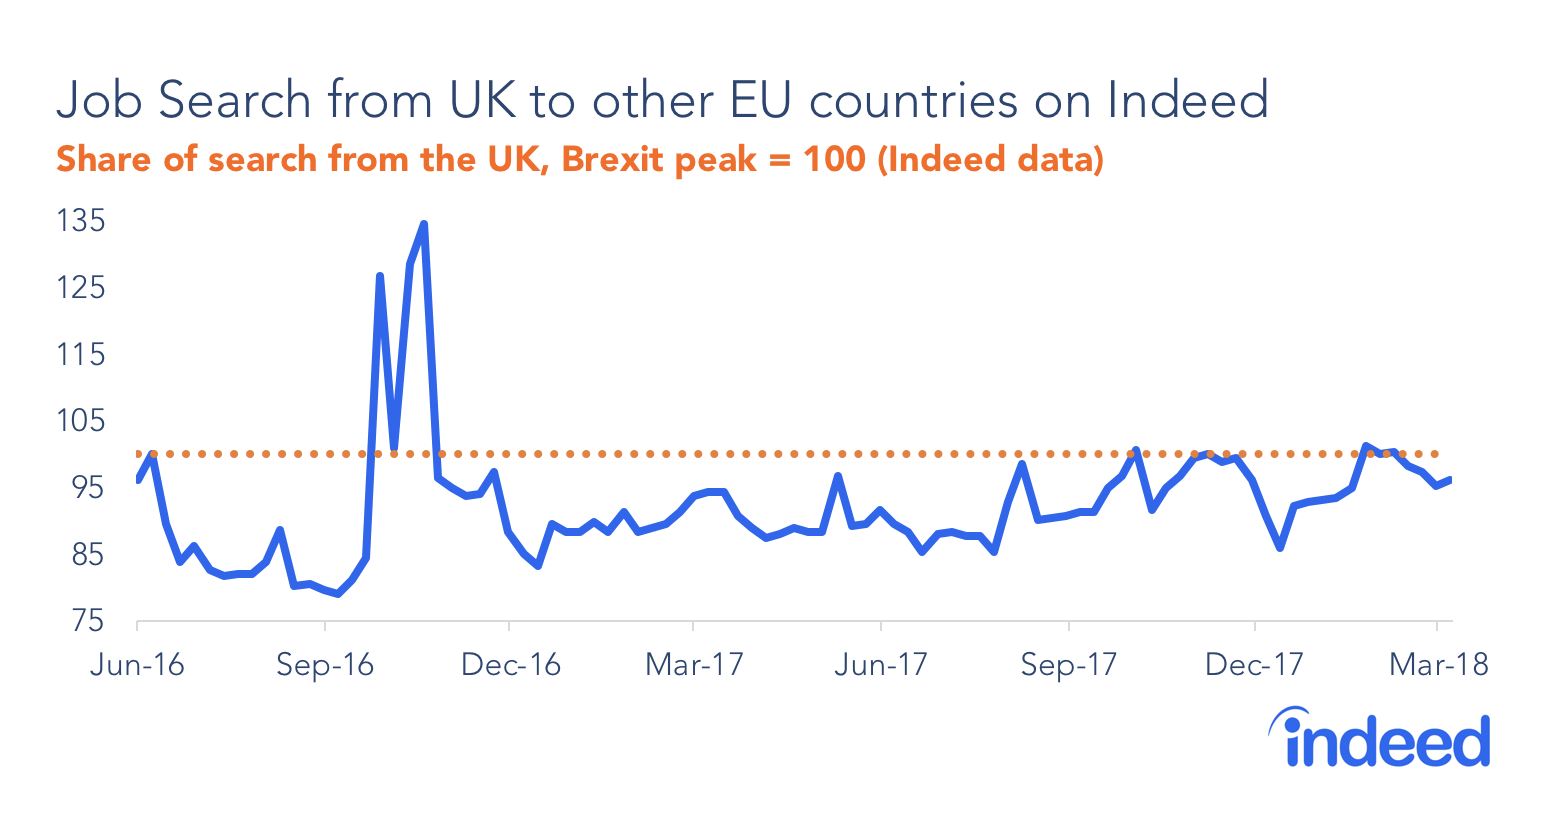 Job Search from UK to other EU countries on Indeed